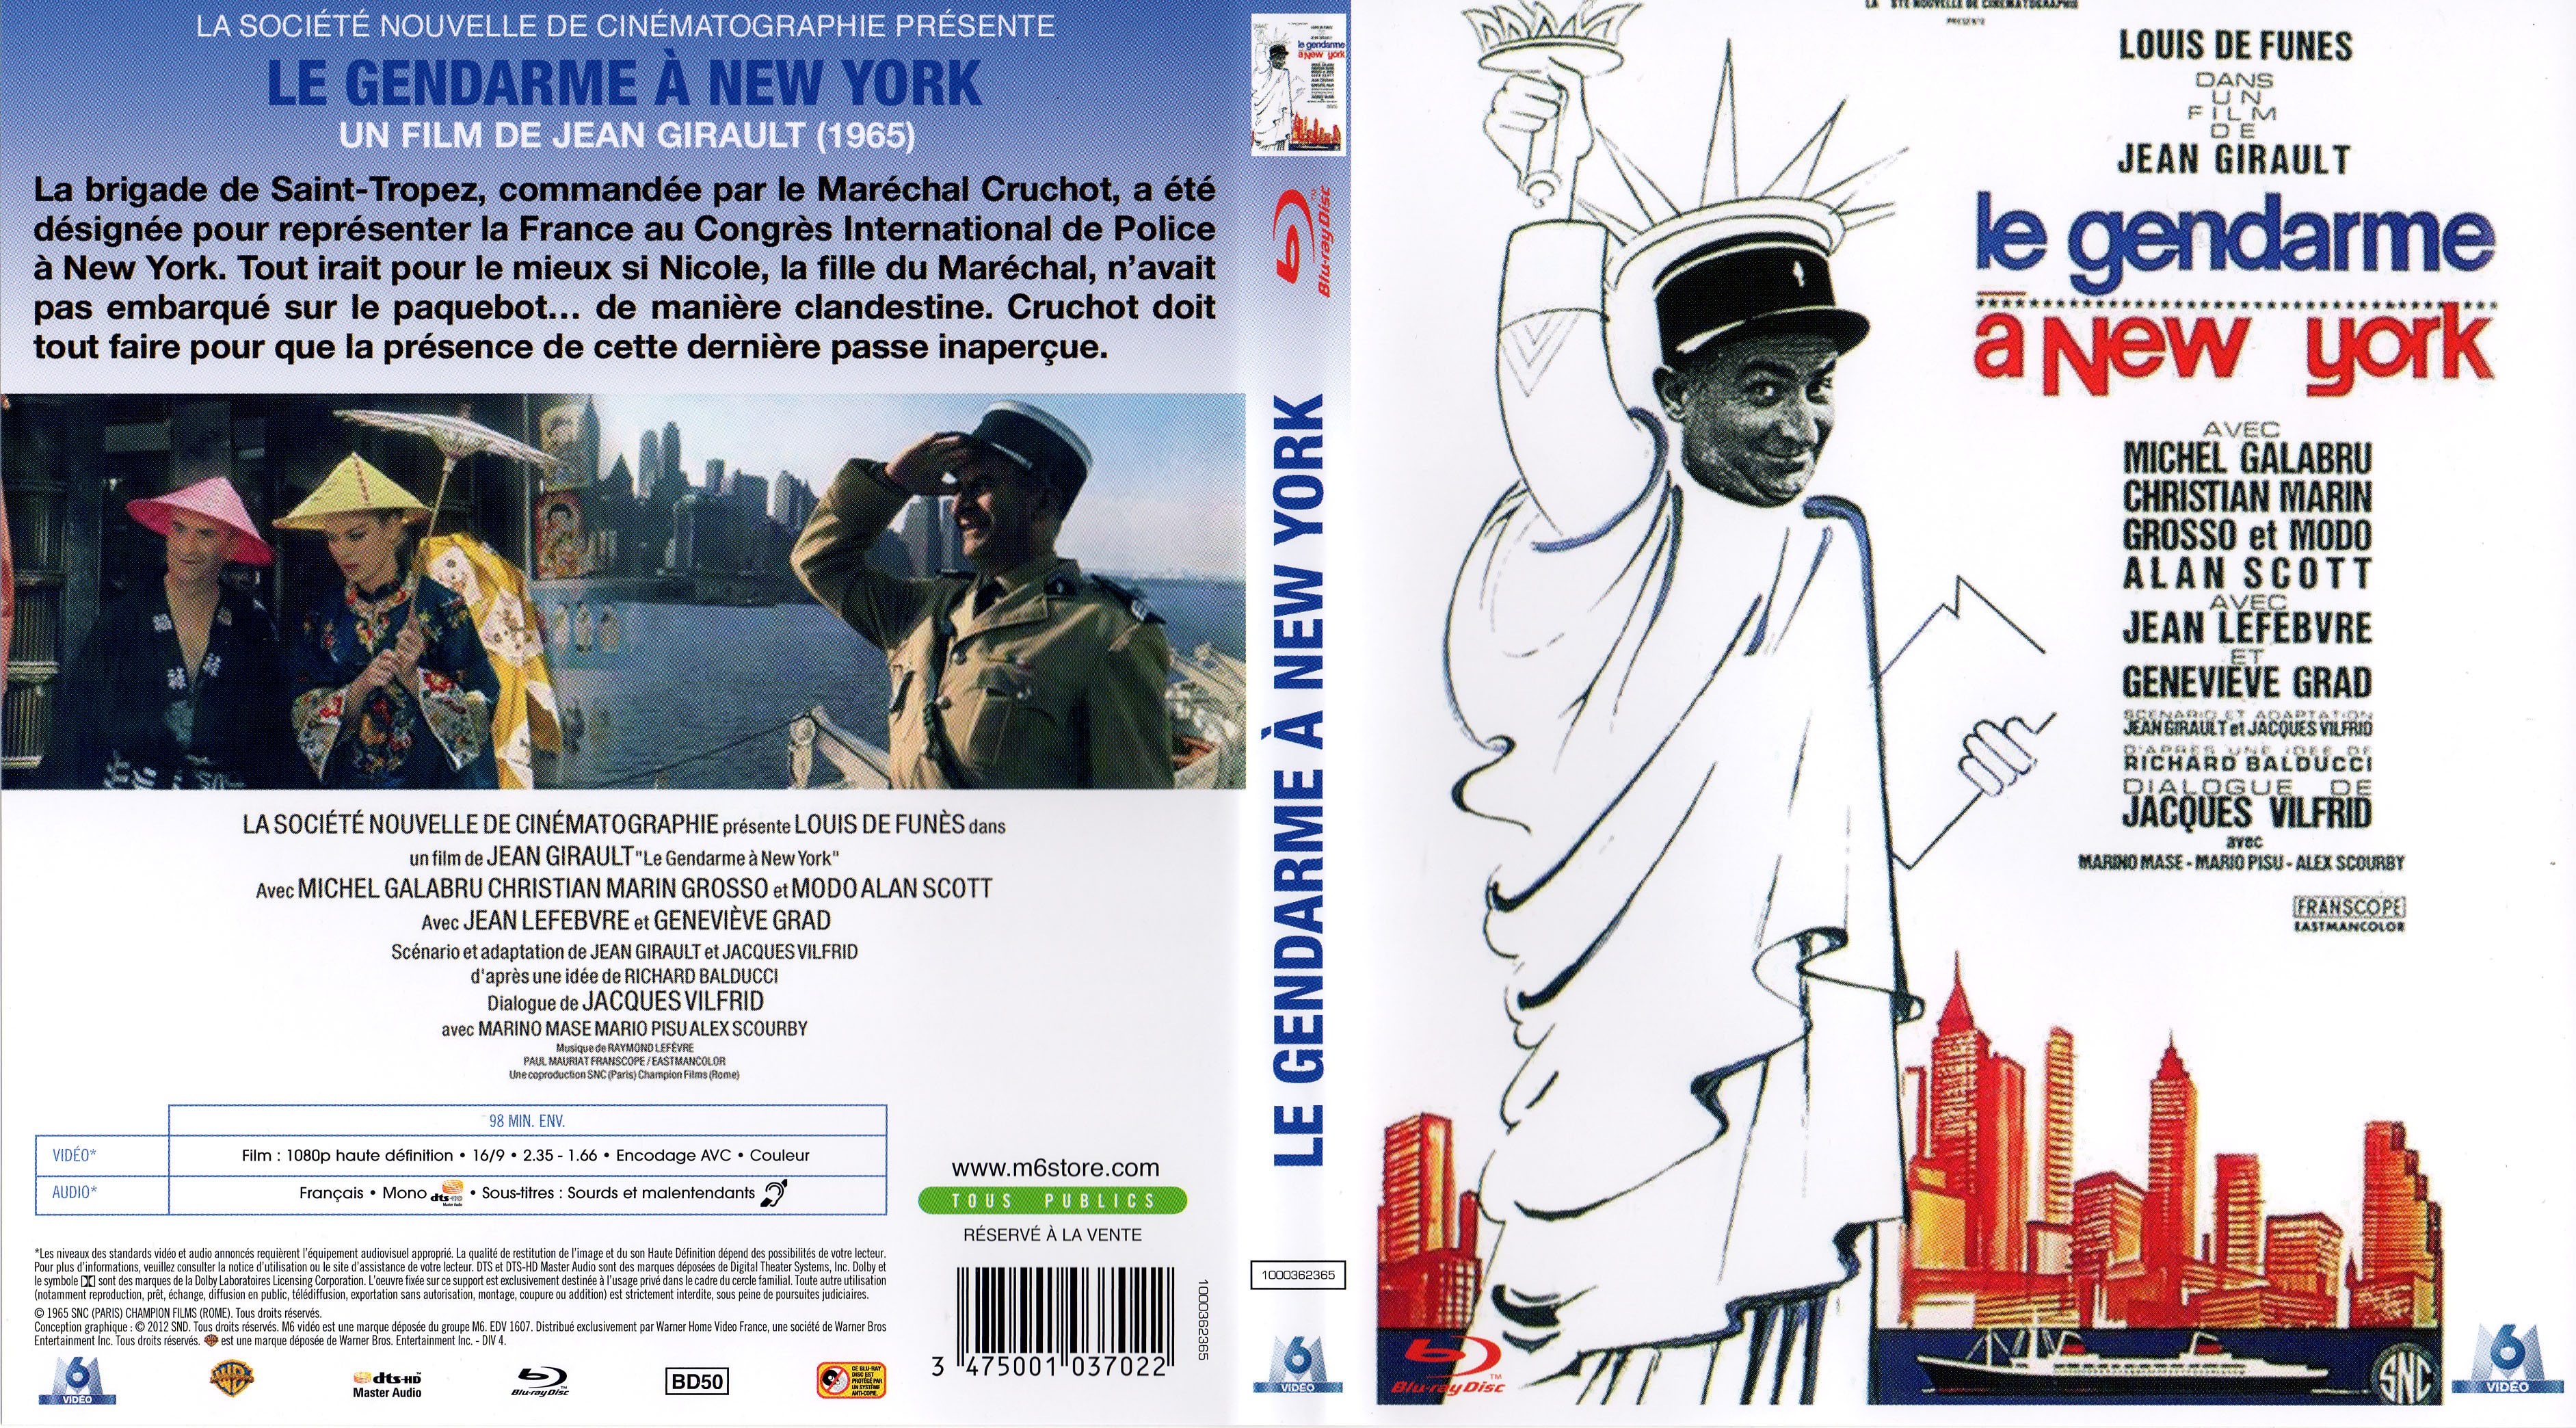 Jaquette DVD Le gendarme  New-York (BLU-RAY)